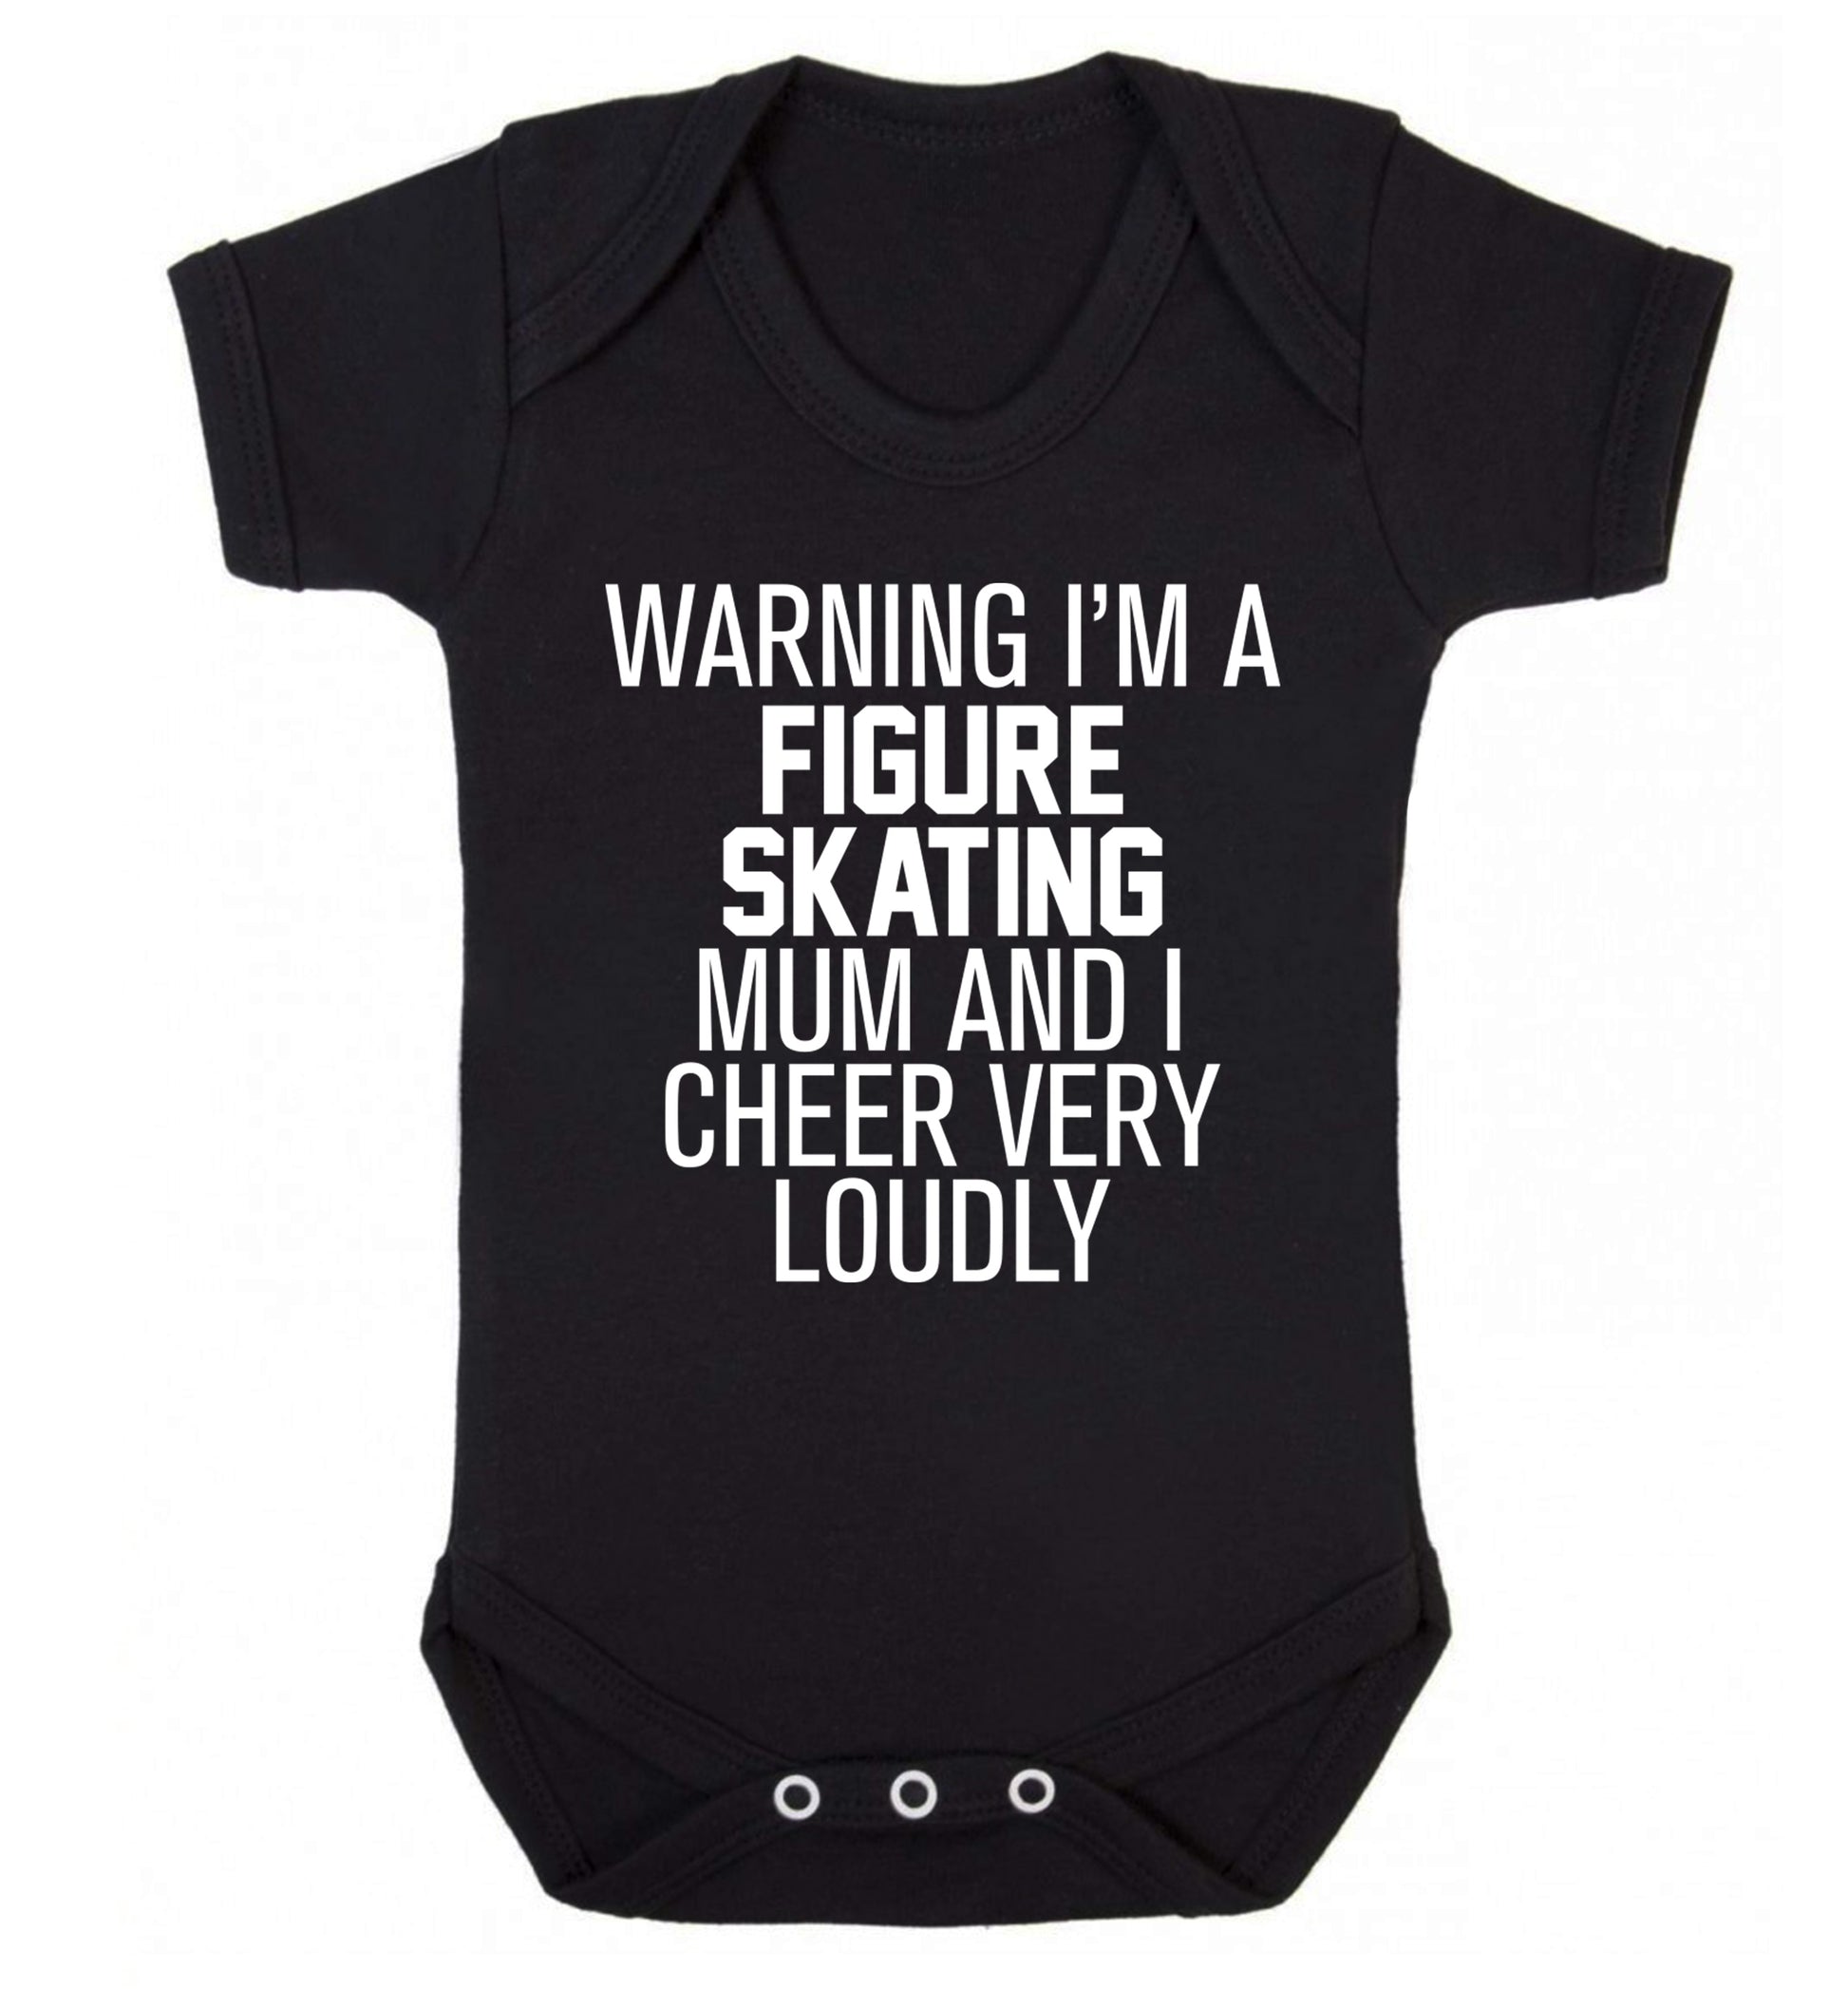 Warning I'm a figure skating mum and I cheer very loudly Baby Vest black 18-24 months